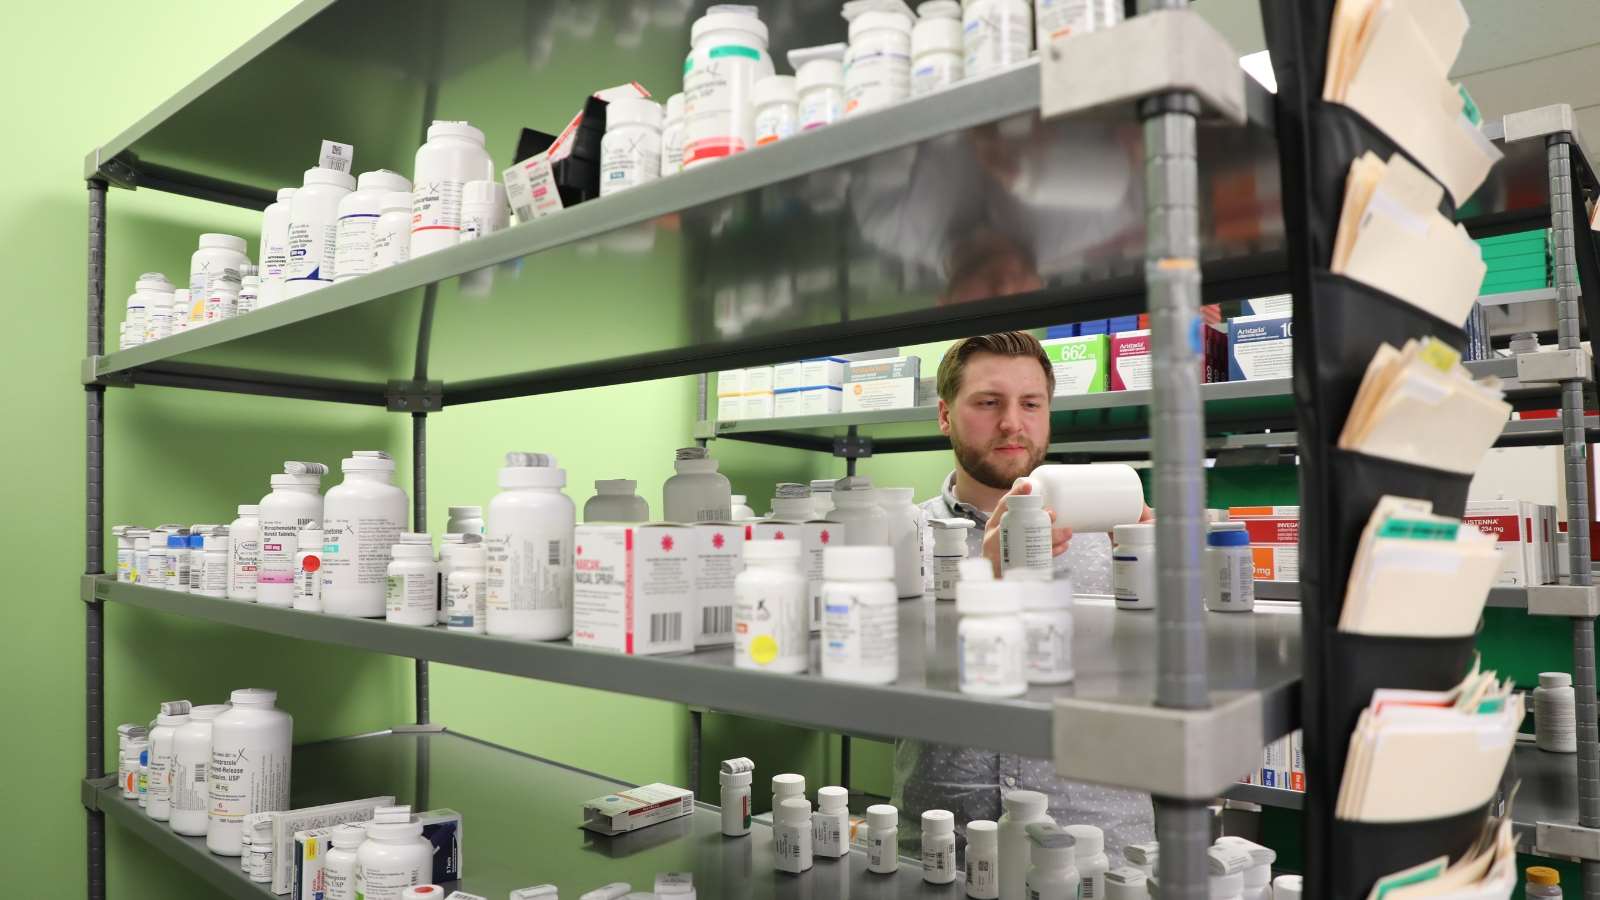 Resident takes inventory of medications at a pharmacy.